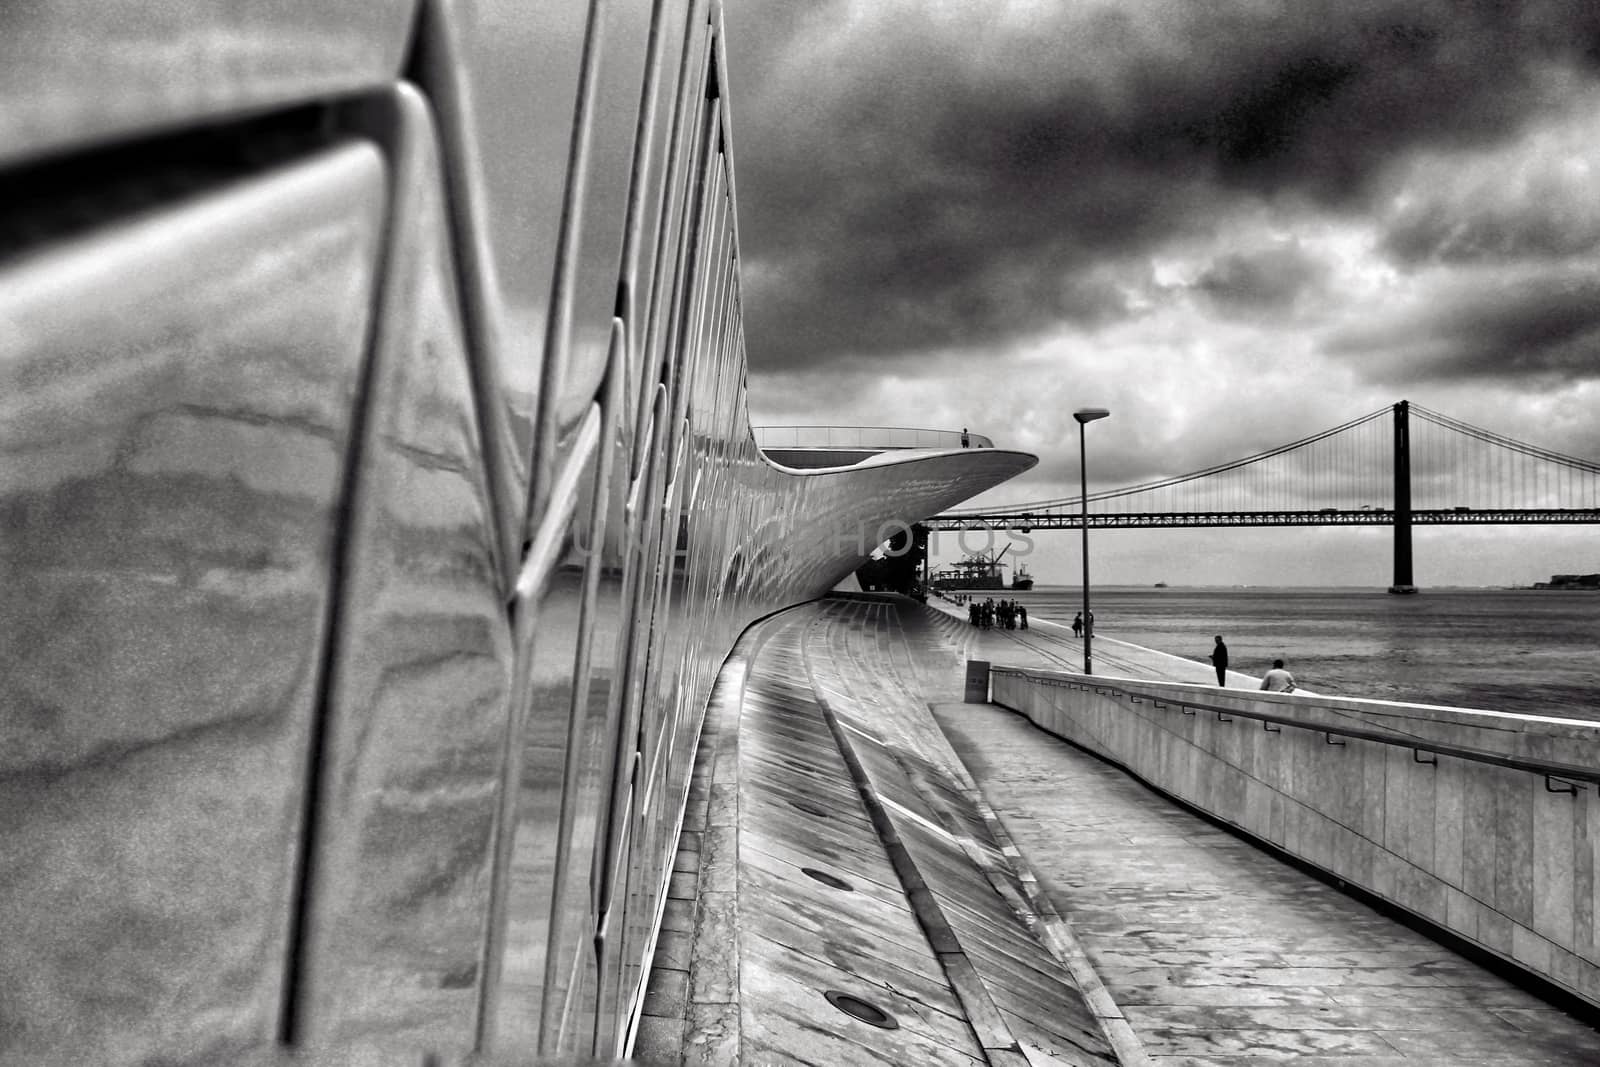 Beautiful ceramic wall of the Maat Museum in Lisbon. 25 of April bridge in the background. Monochrome photography.